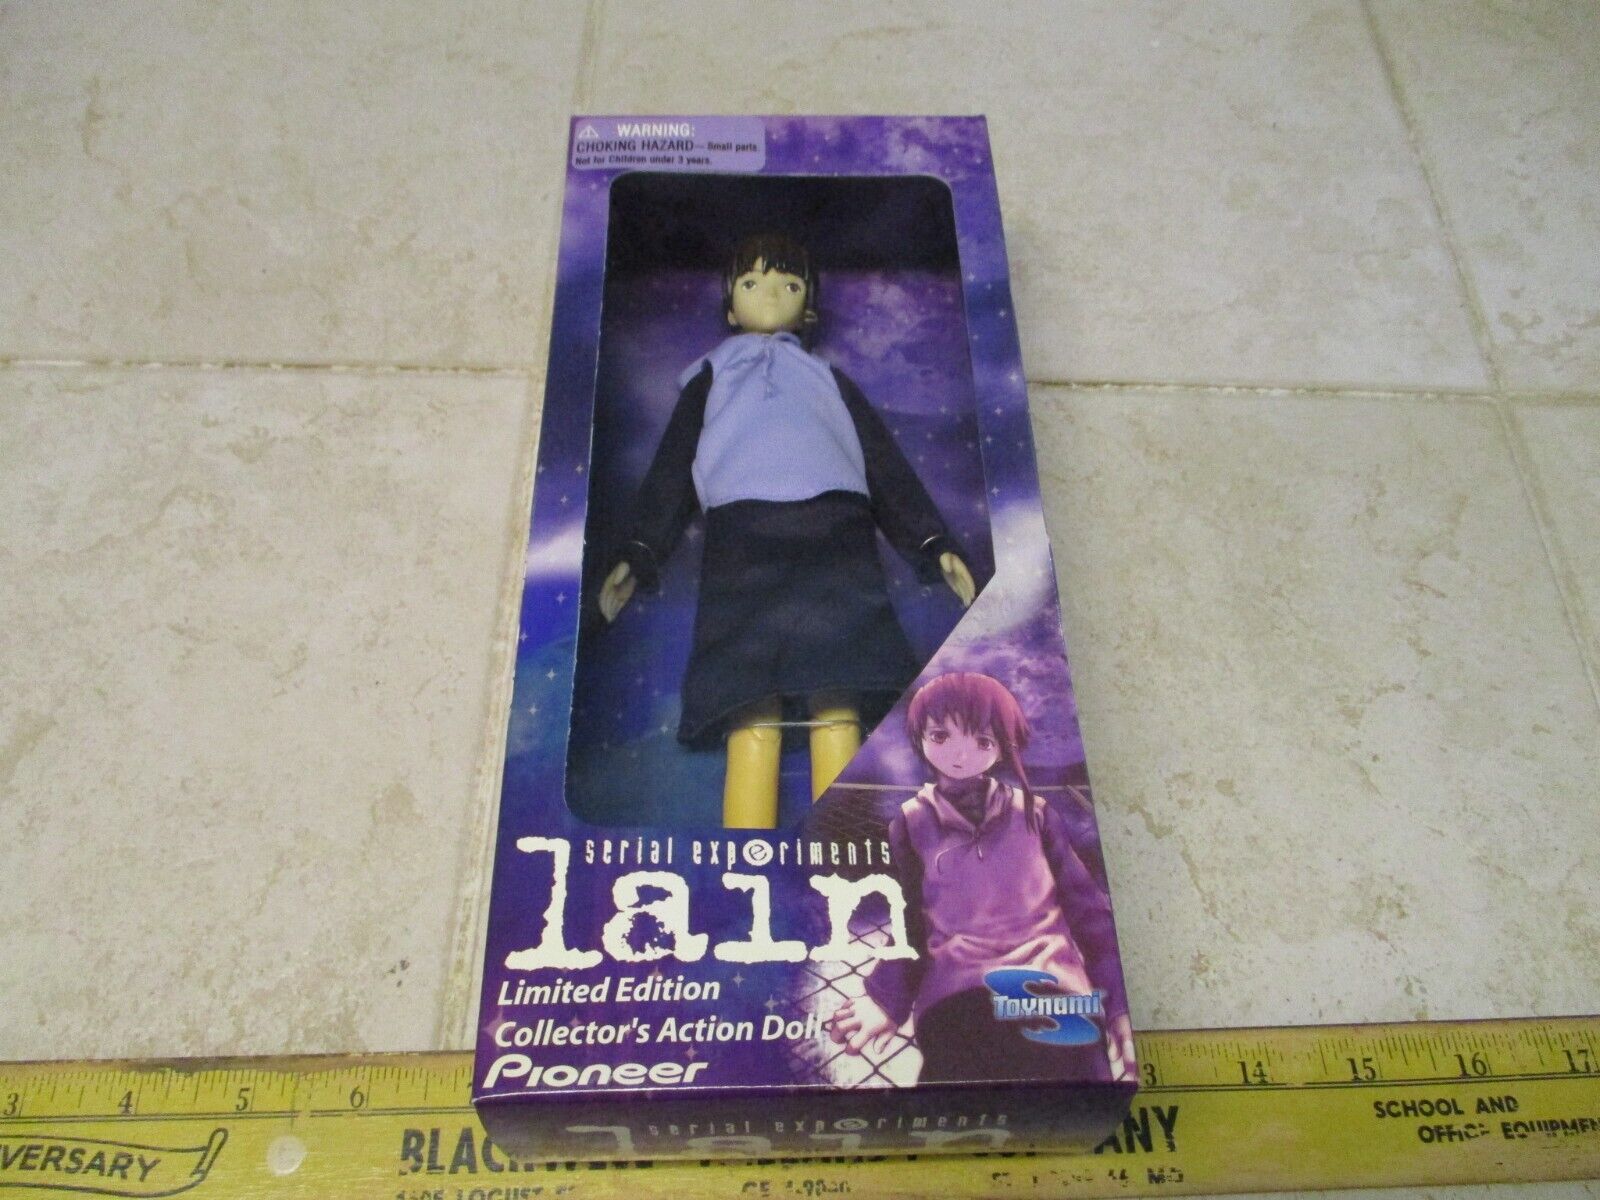 Serial Experiments Lain Urban Outfit Collector's Action Figure Doll - NIB LE